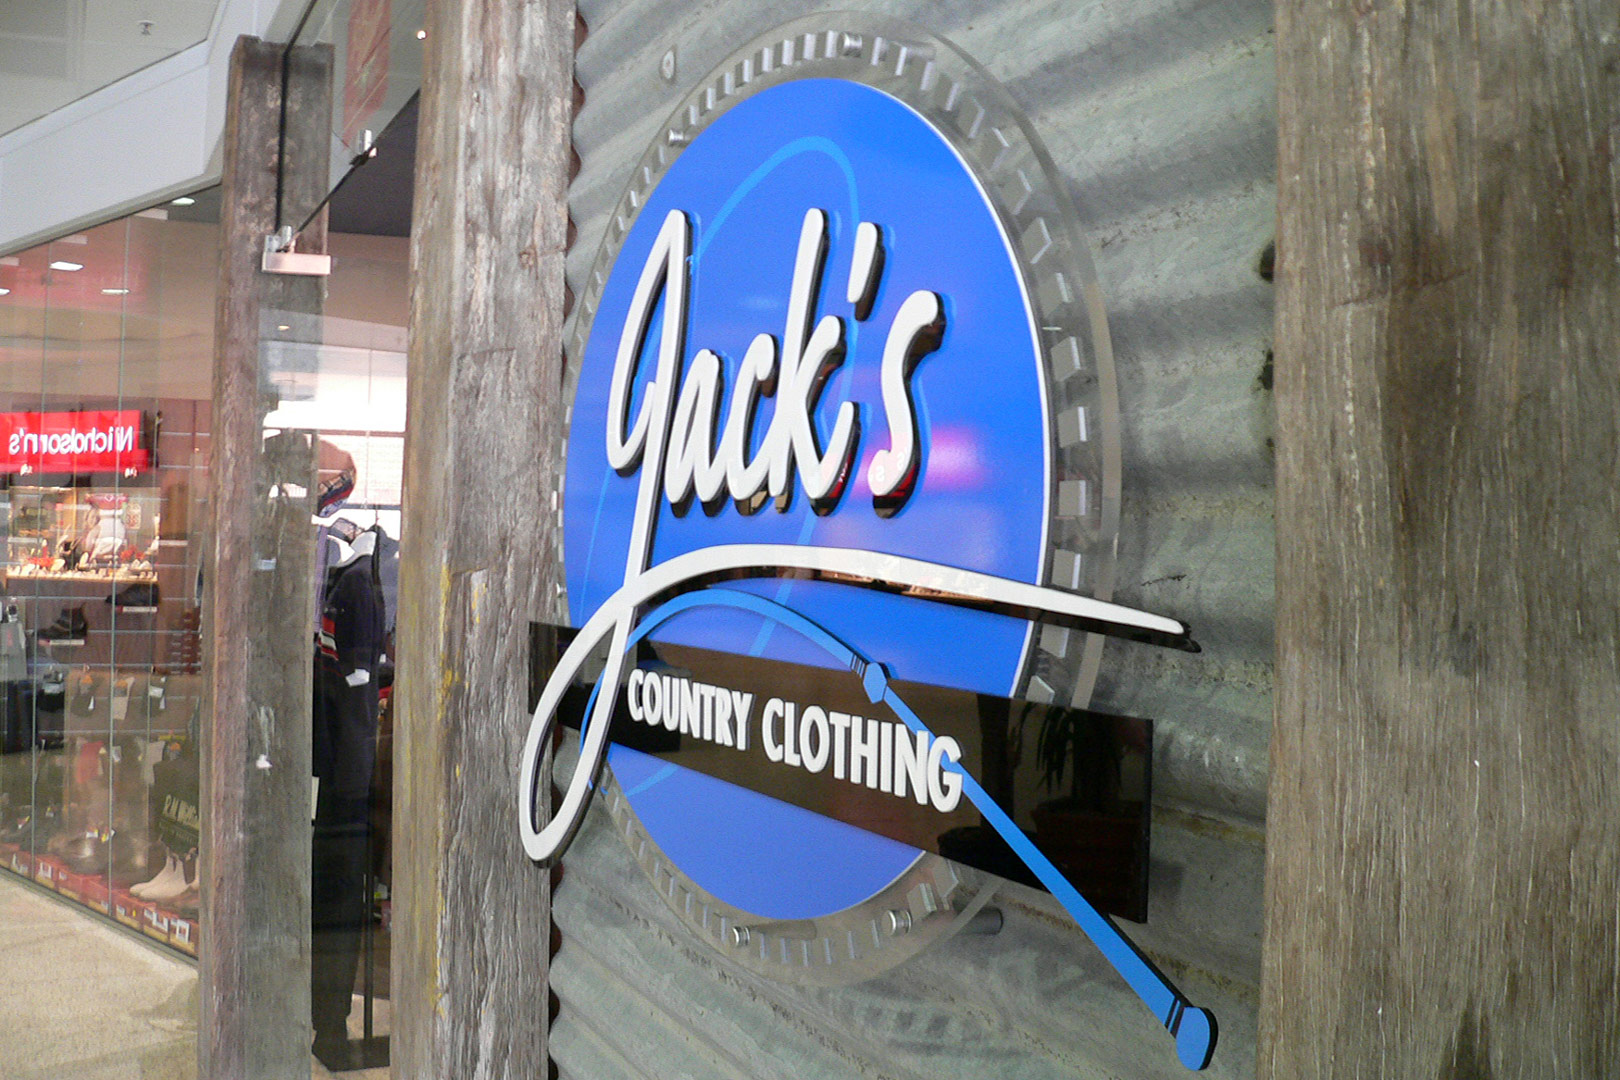  Jack's Country Clothing 